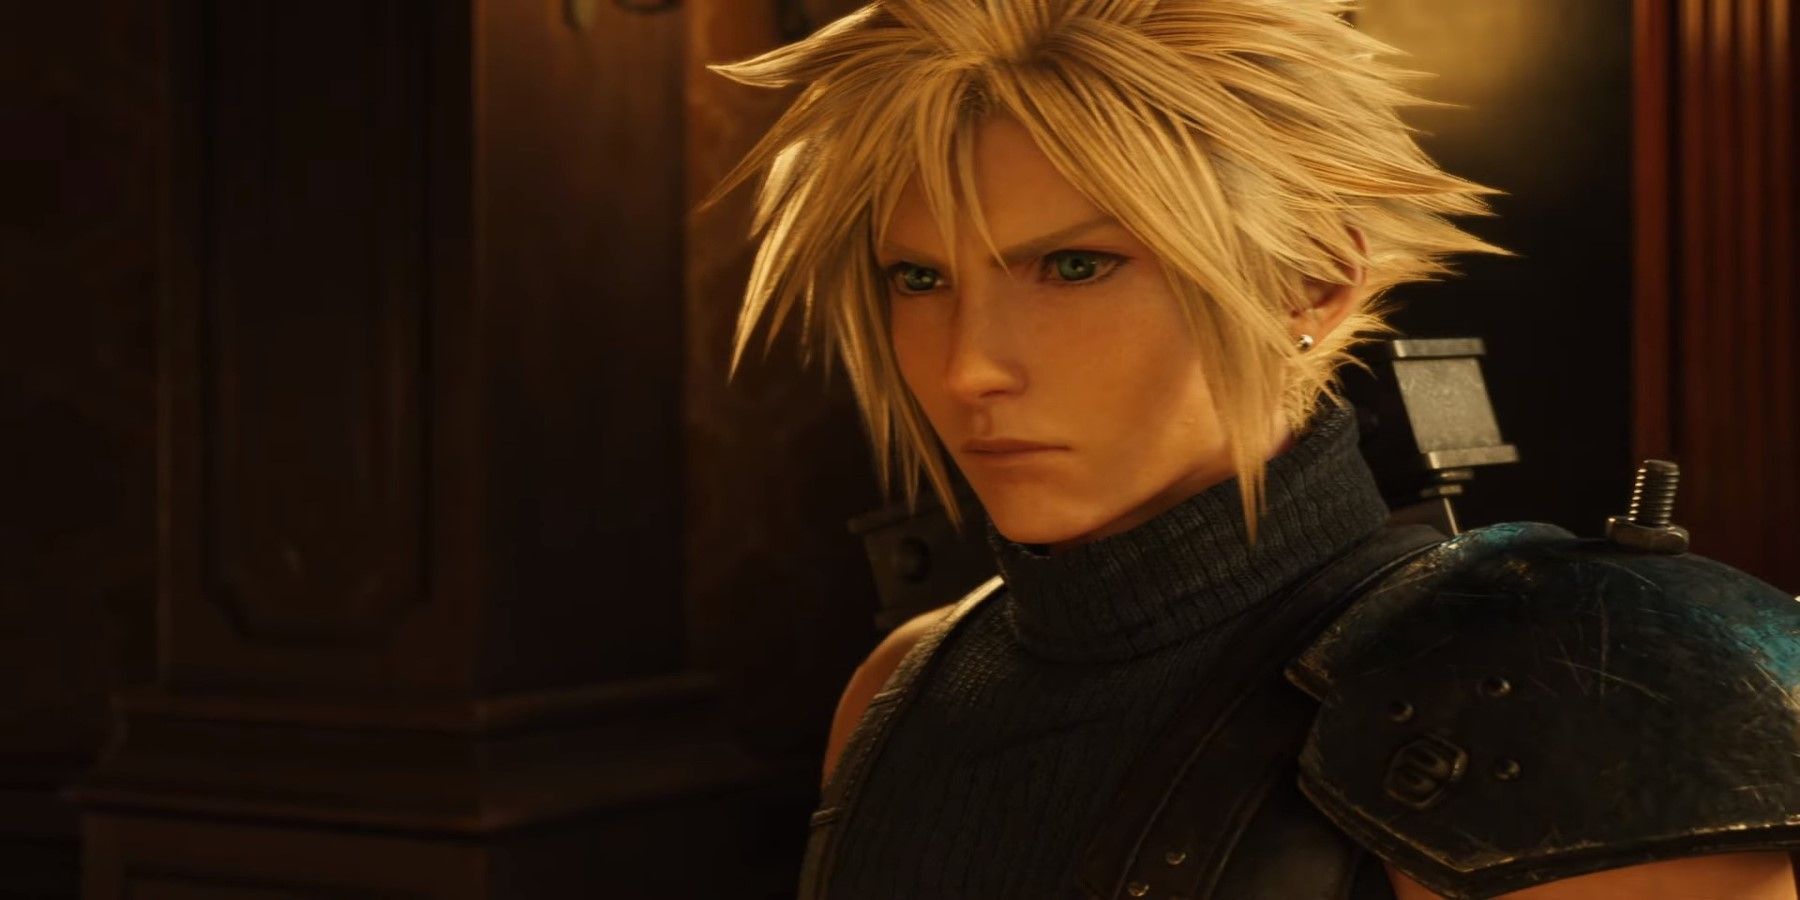 final-fantasy-protagonist-tier-list-s-tier-cloud-squall-clive